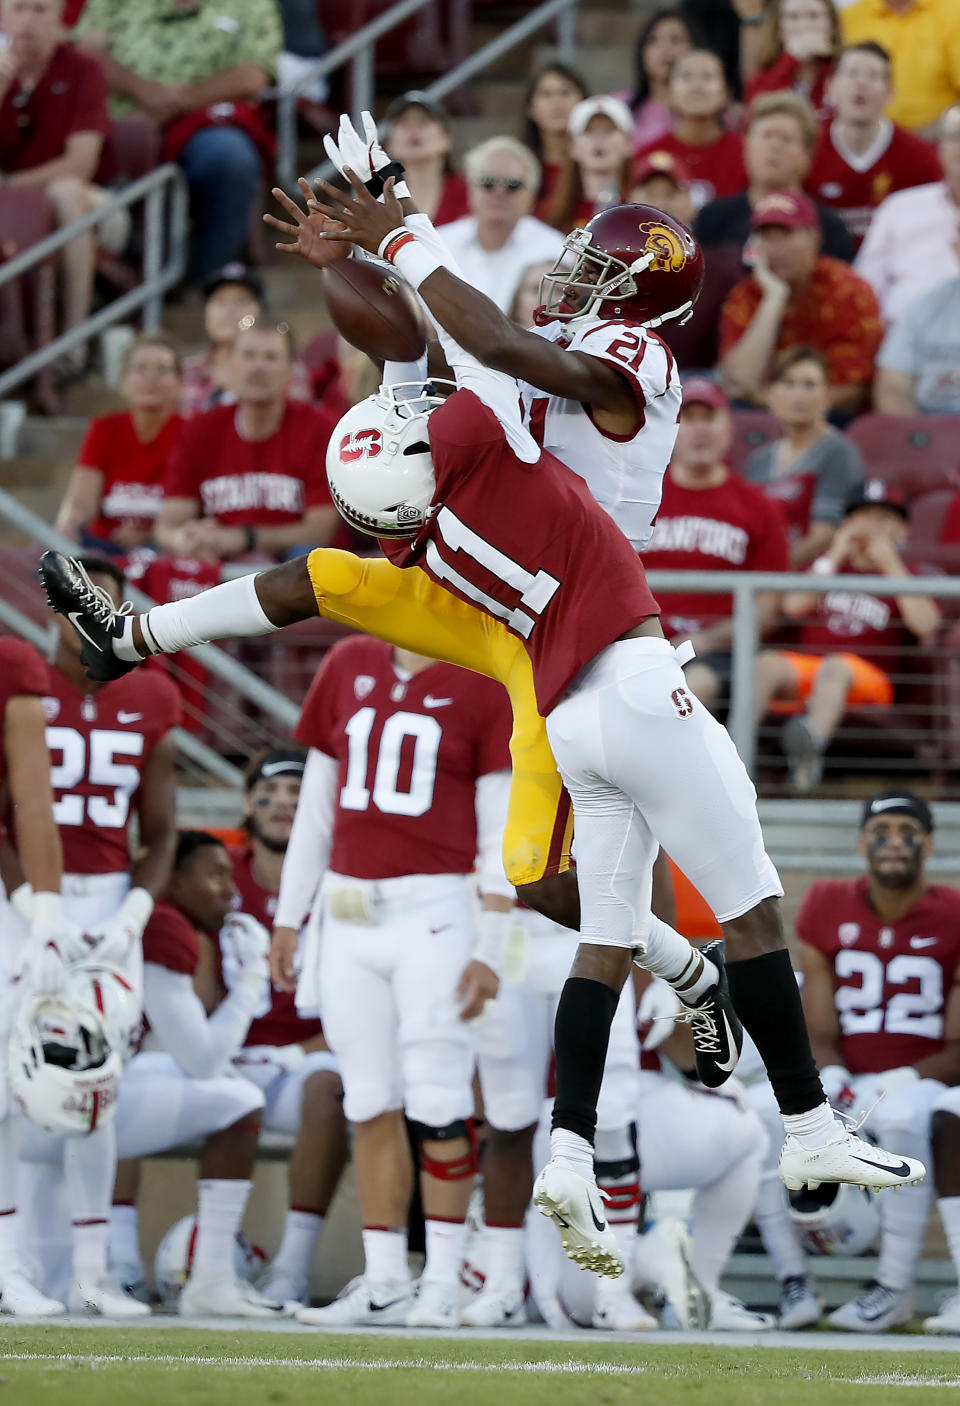 Stanford cornerback Paulson Adebo (11) breaks up a pass for Southern California wide receiver Tyler Vaughns (21) during the first half of an NCAA college football game, Saturday, Sept. 8, 2018, in Stanford, Calif. (AP Photo/Tony Avelar)